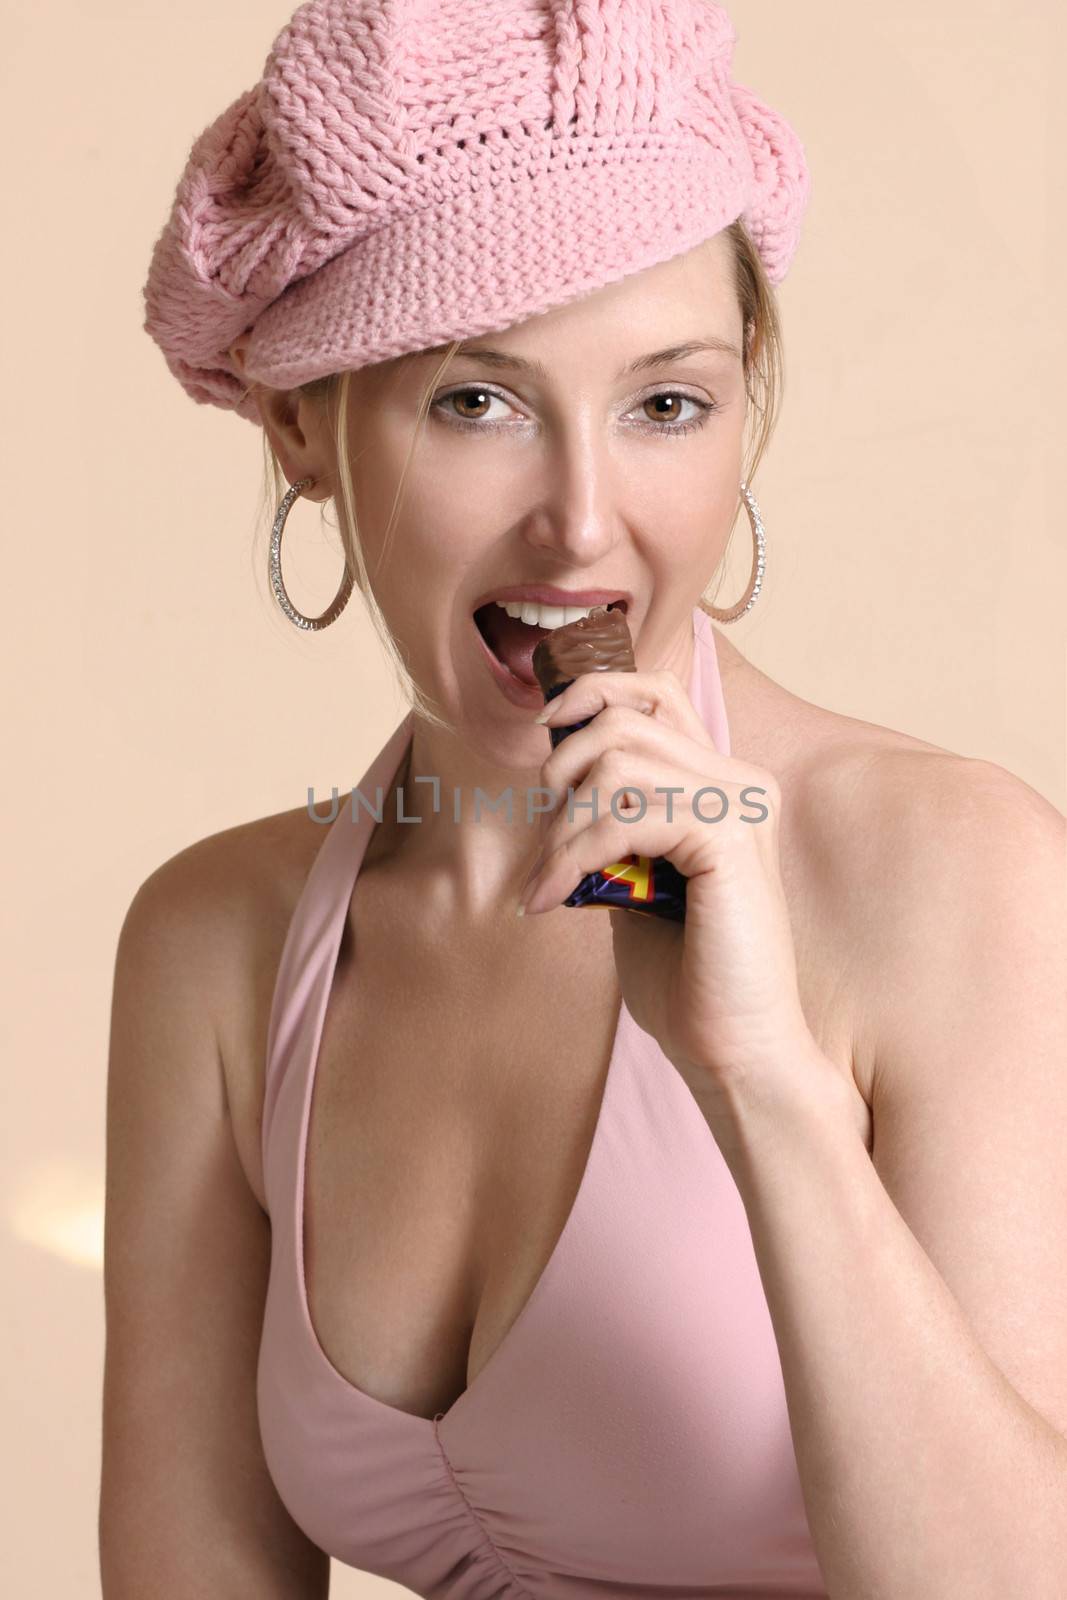 A woman eating a delicious chocolate bar.  She is wearing a pink hat and halter